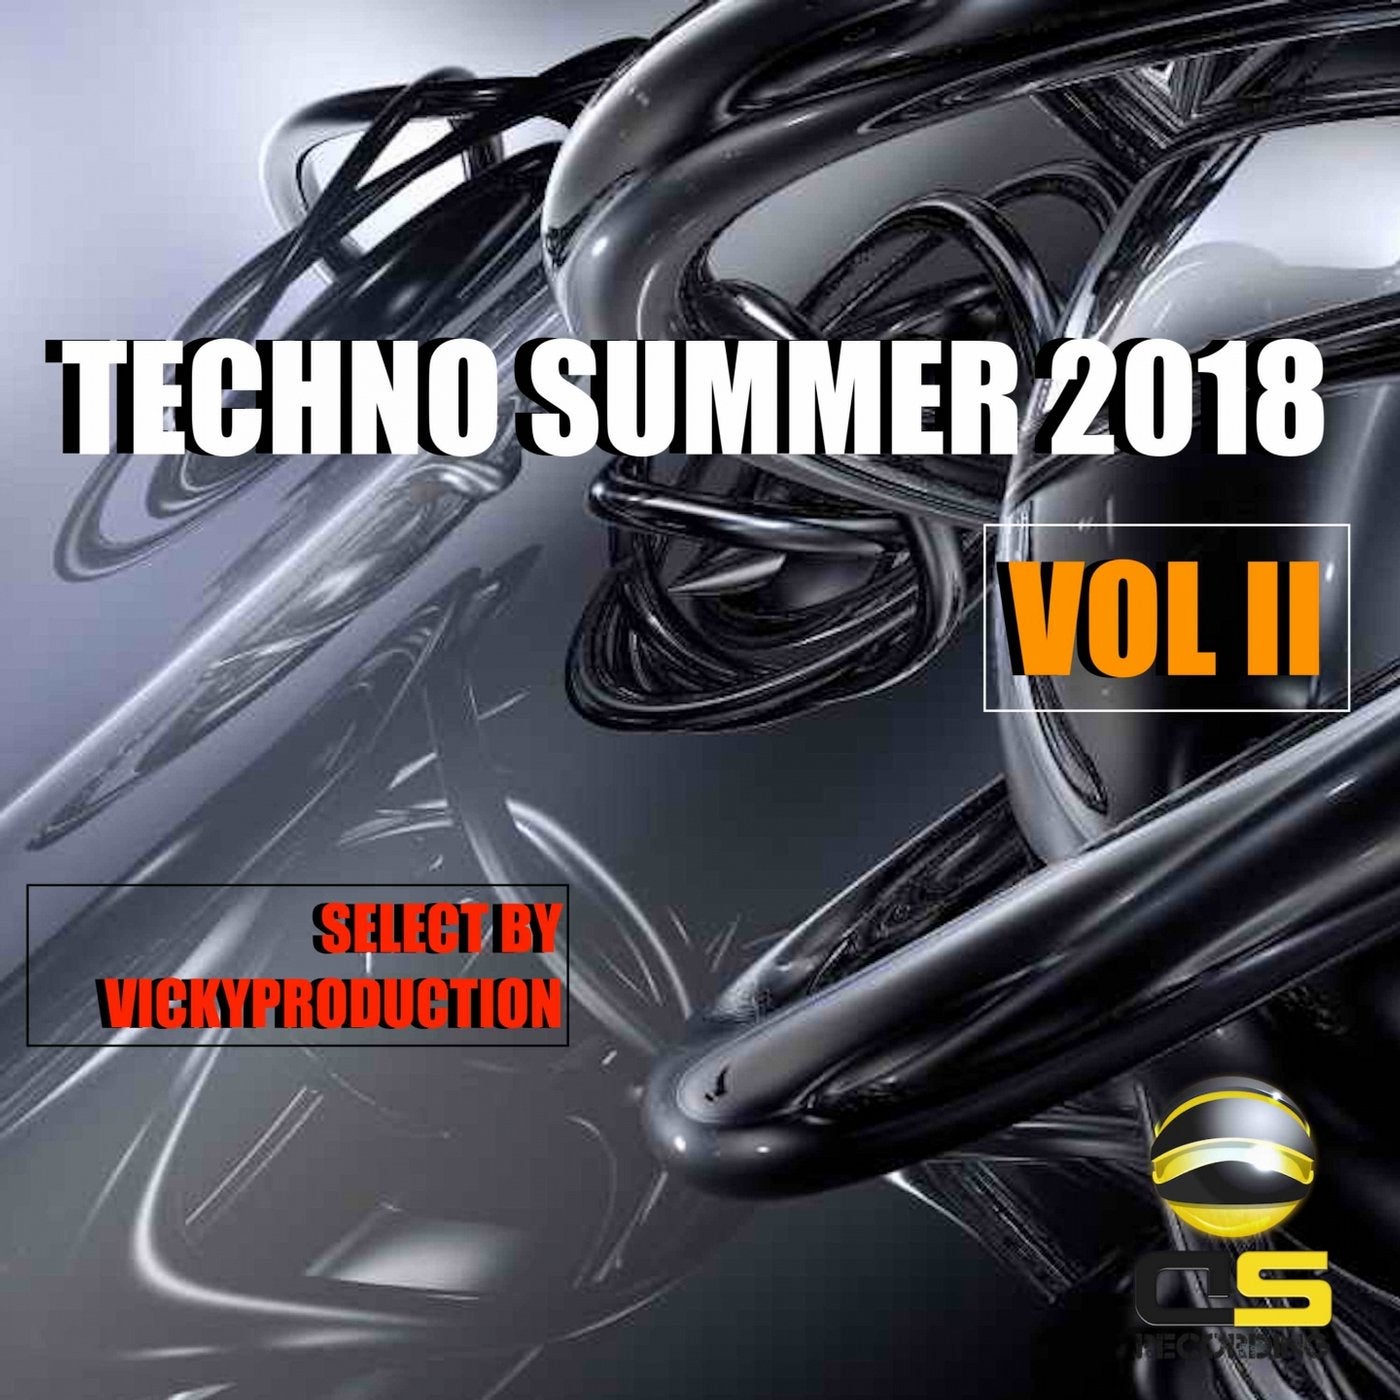 Techno Summer 2018 Vol. II (Select by Vicky Productions)